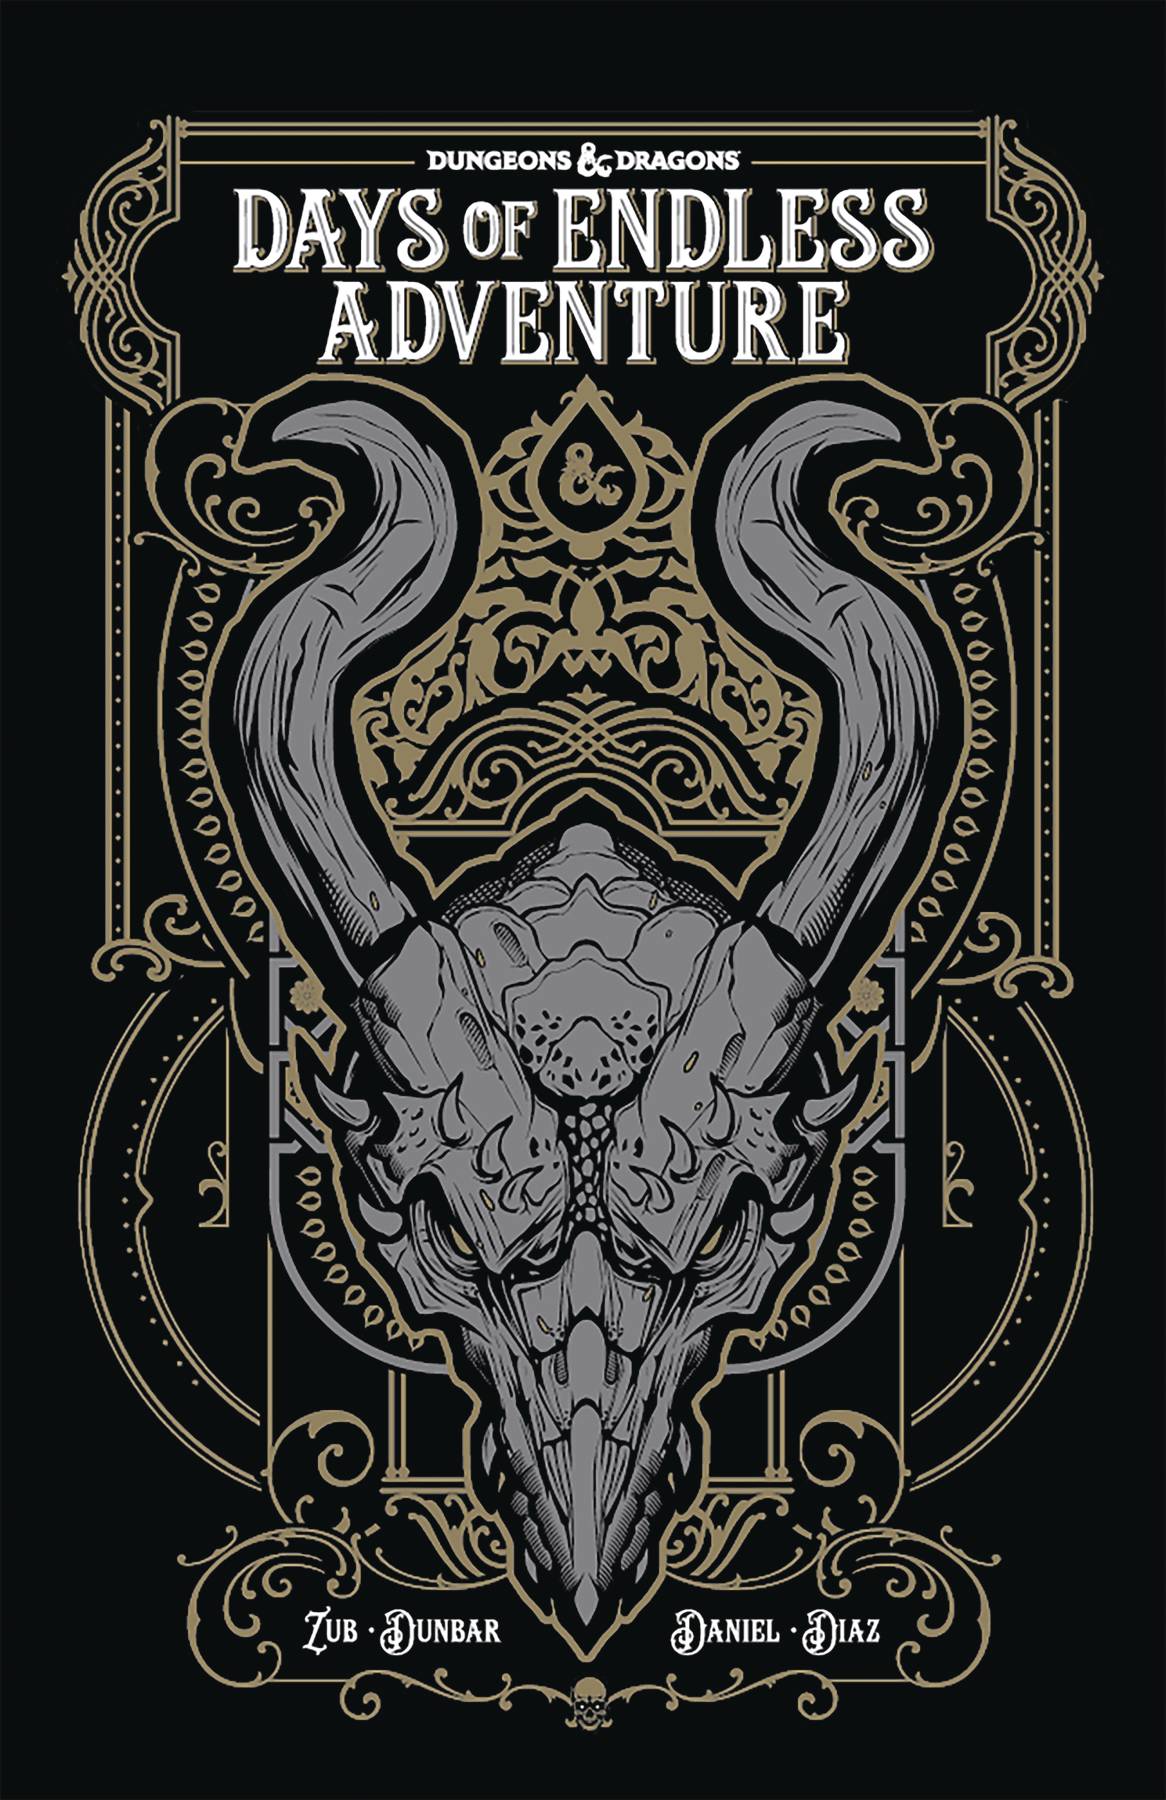 Dungeons & Dragons Days of Endless Adventure Graphic Novel